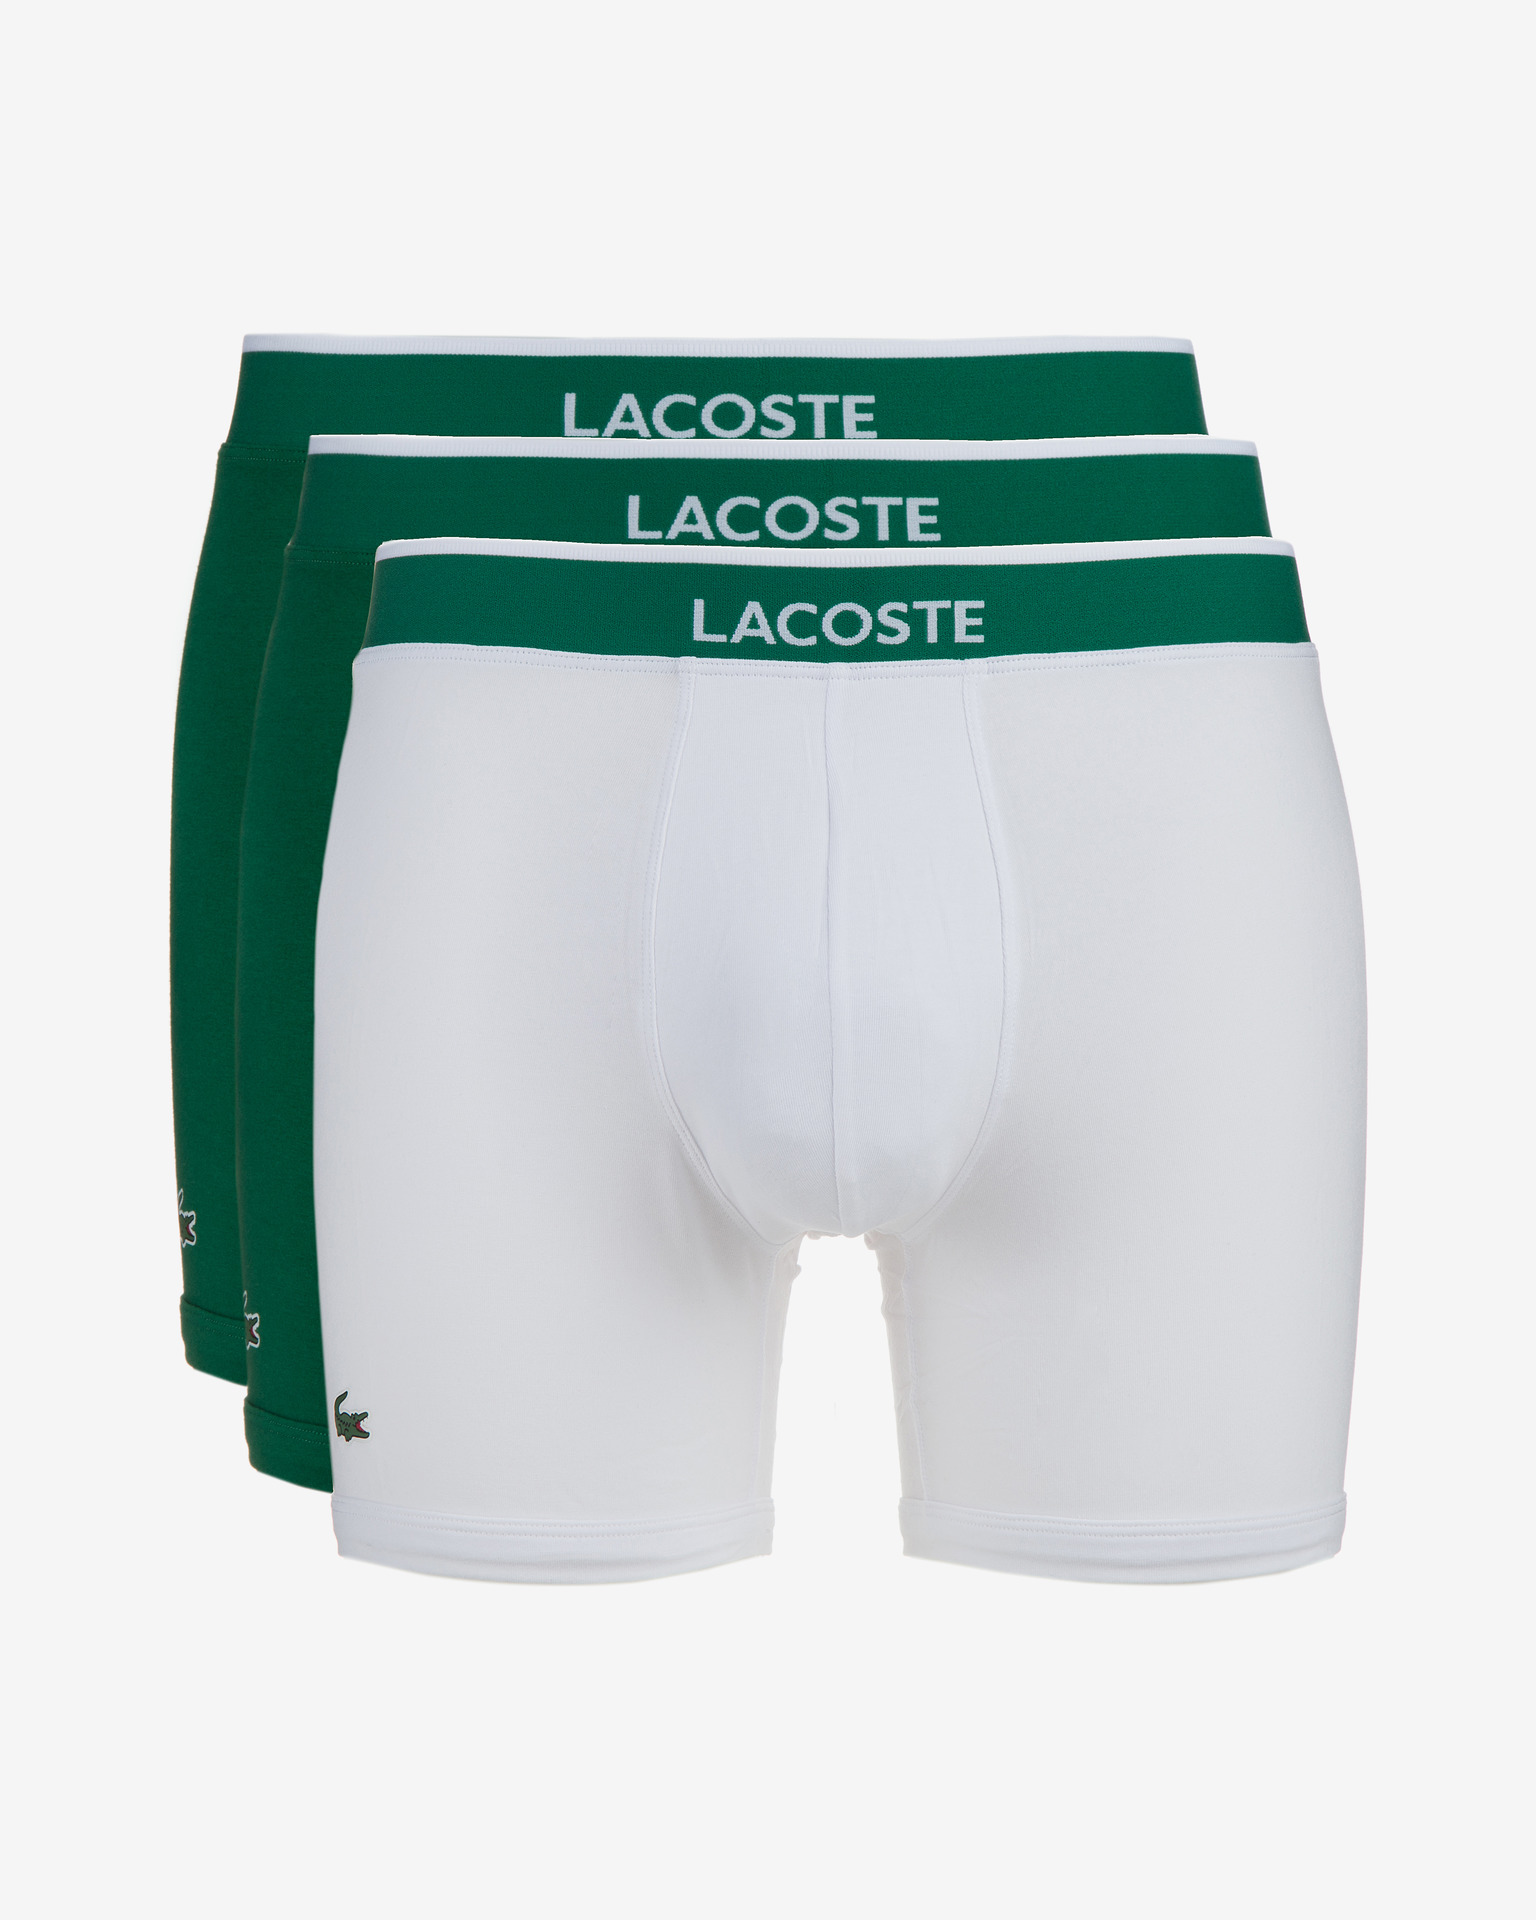 Lacoste Casual Cotton Stretch 3 Pack White/Green/Navy Men Trunks Boxer –  Last Stop Clothing Shops